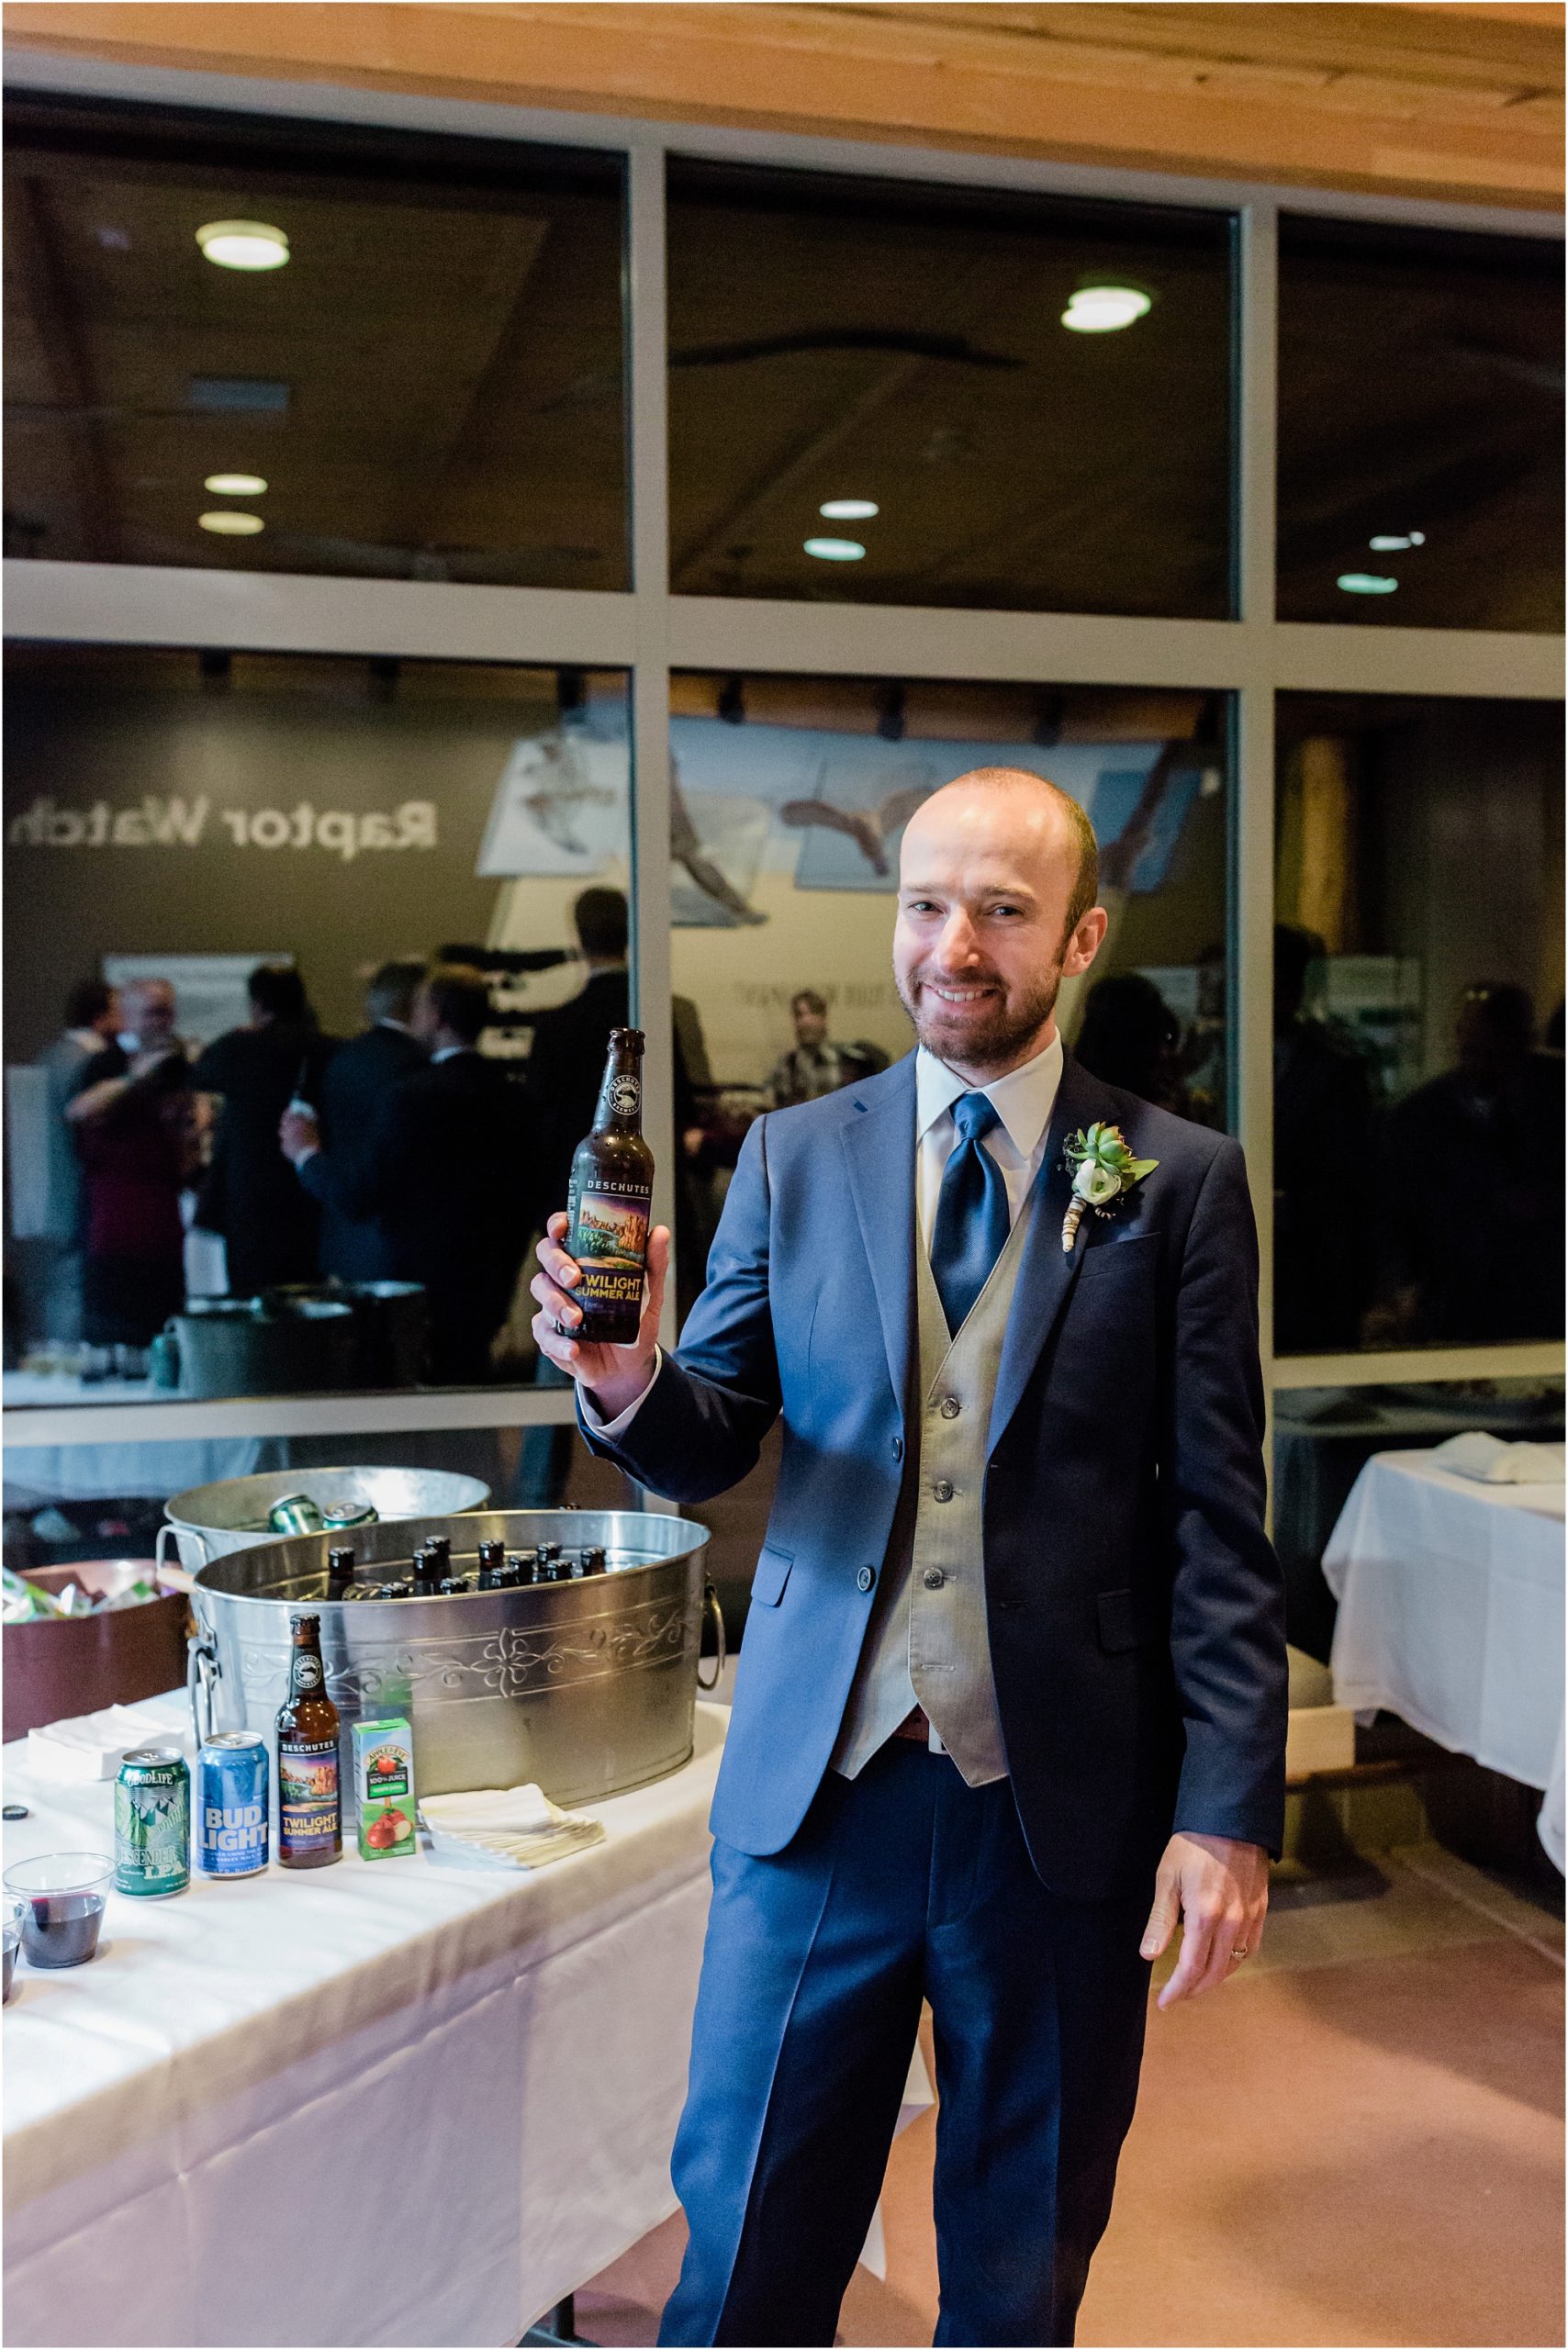 It's time for this dapper groom, dressed in a blue suit, to enjoy his Deschutes Brewery craft beer at his Bend, Oregon wedding. | Erica Swantek Photography